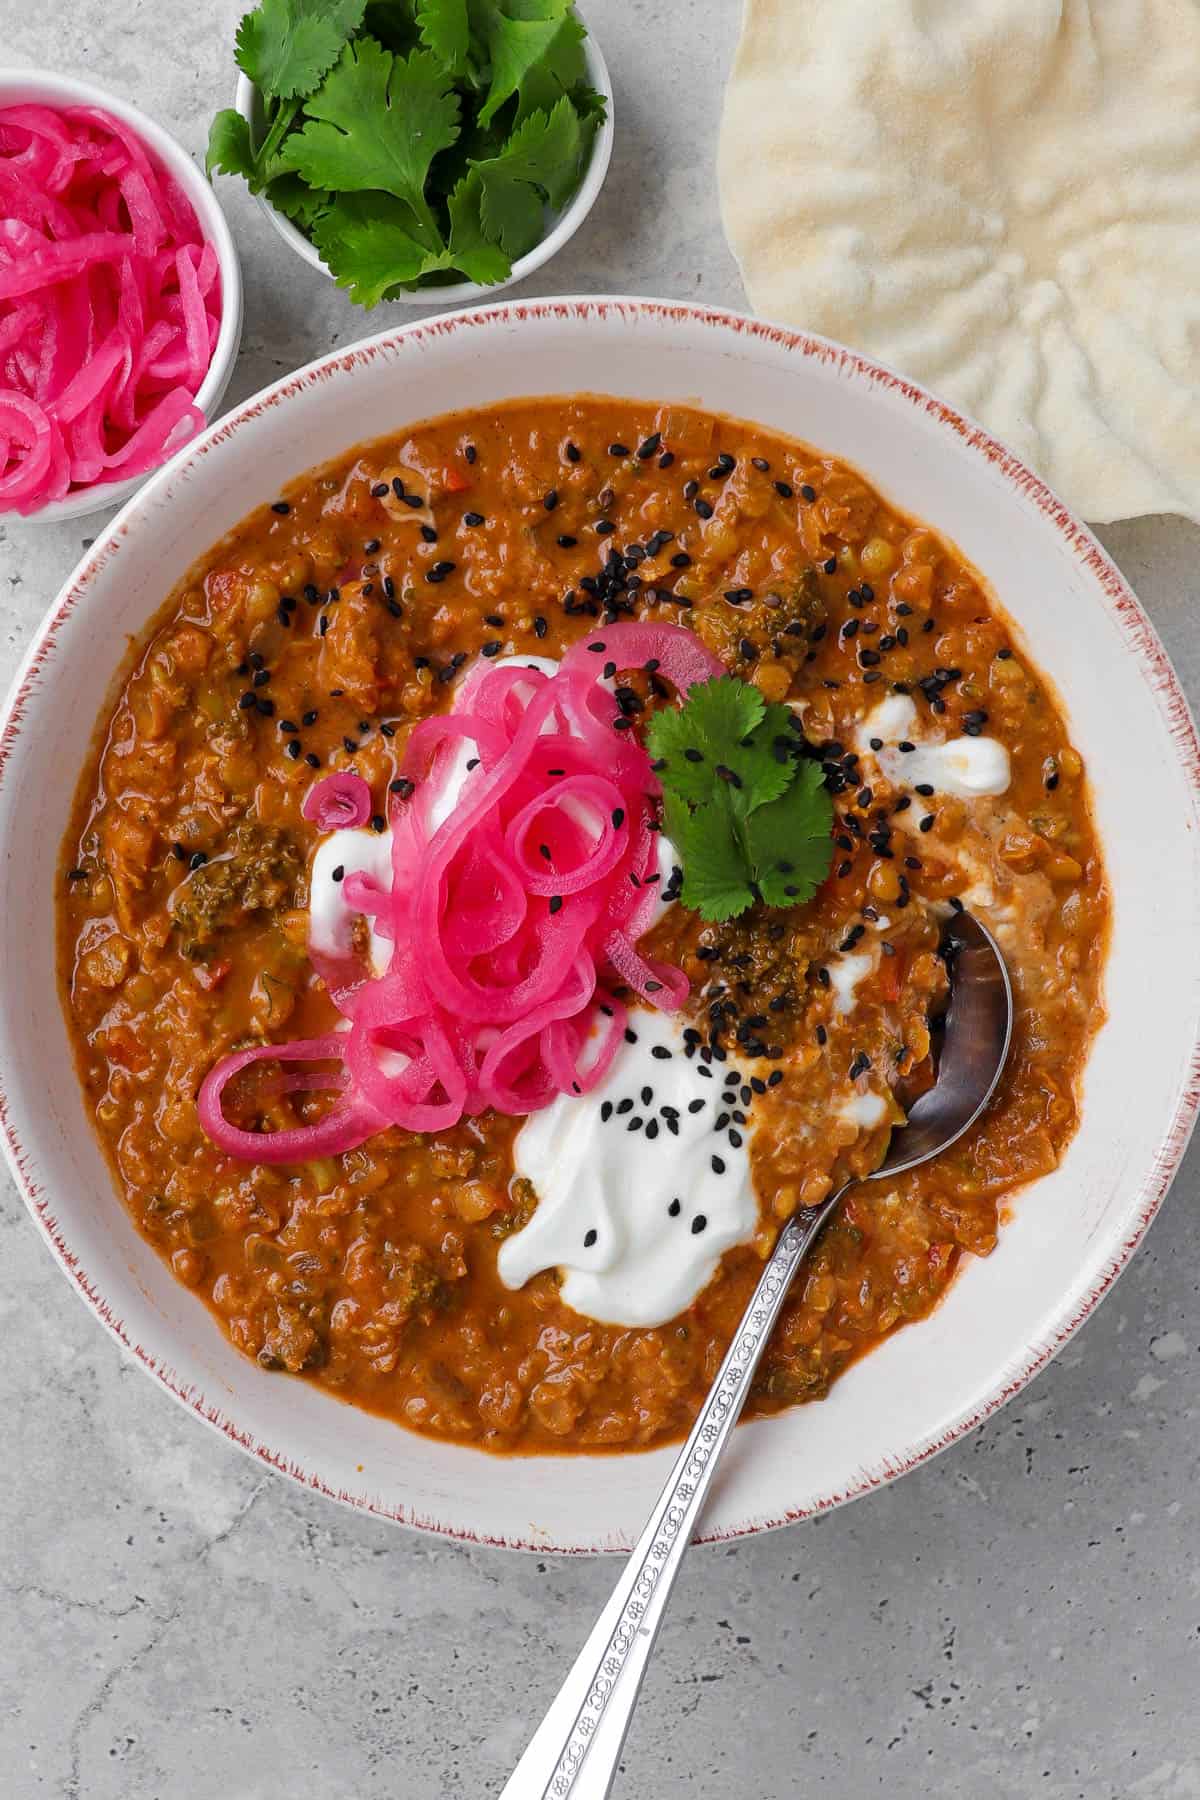 Dahl served in a serving bowl with spoon. Topped with pickled onions, yoghurt, coriander leaves and black sesame seeds for garnish.